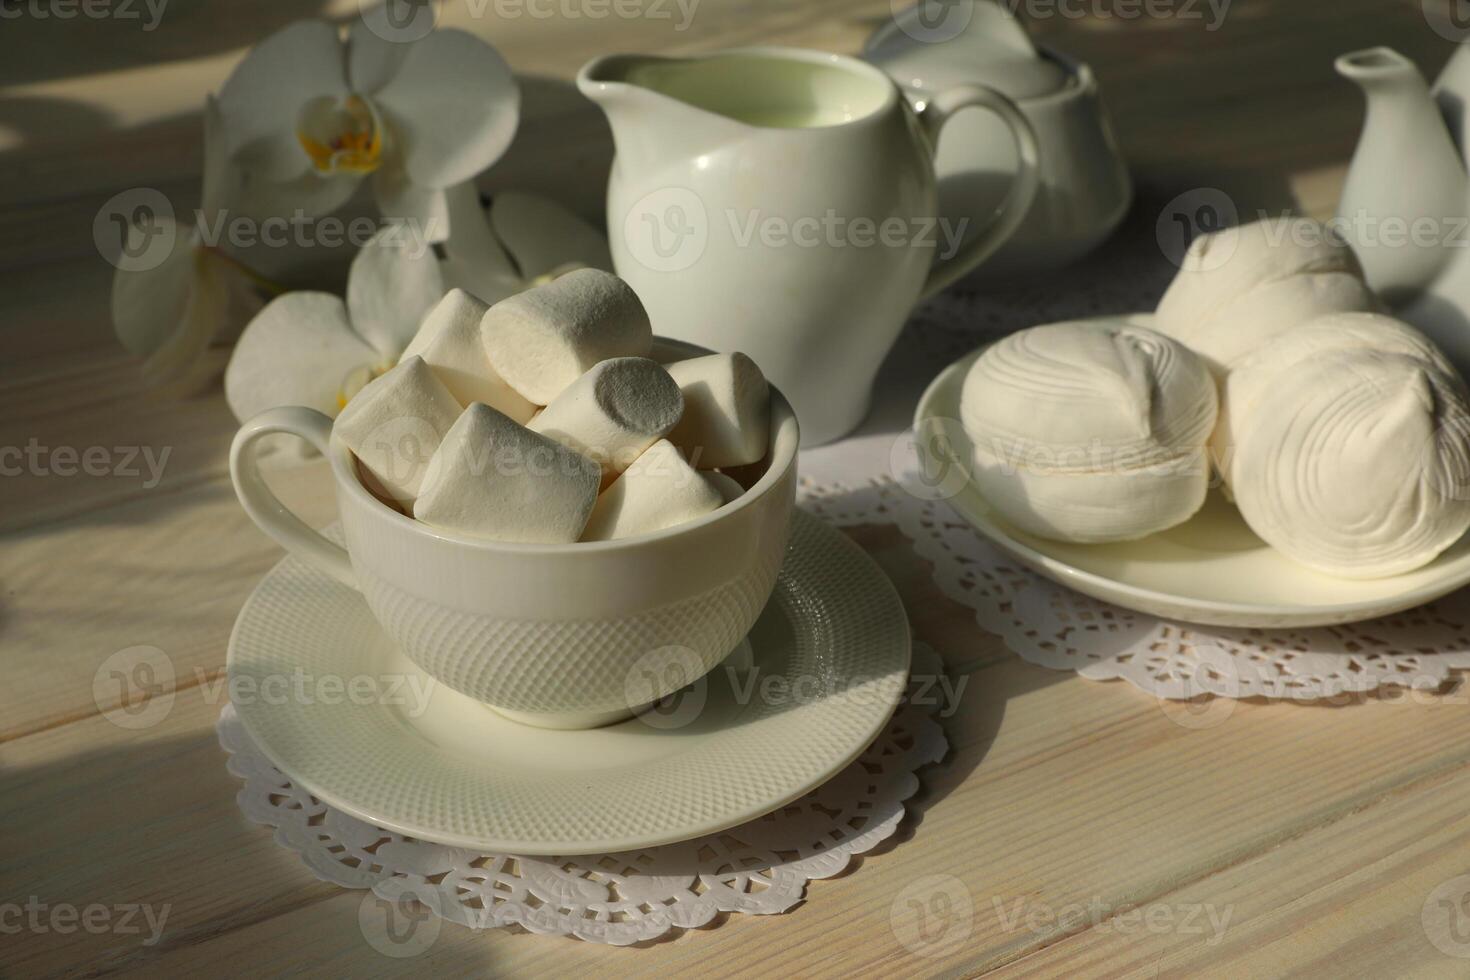 Spring breakfast with marshmallow, coffee and milk. Flatlay with food and flower in white color photo